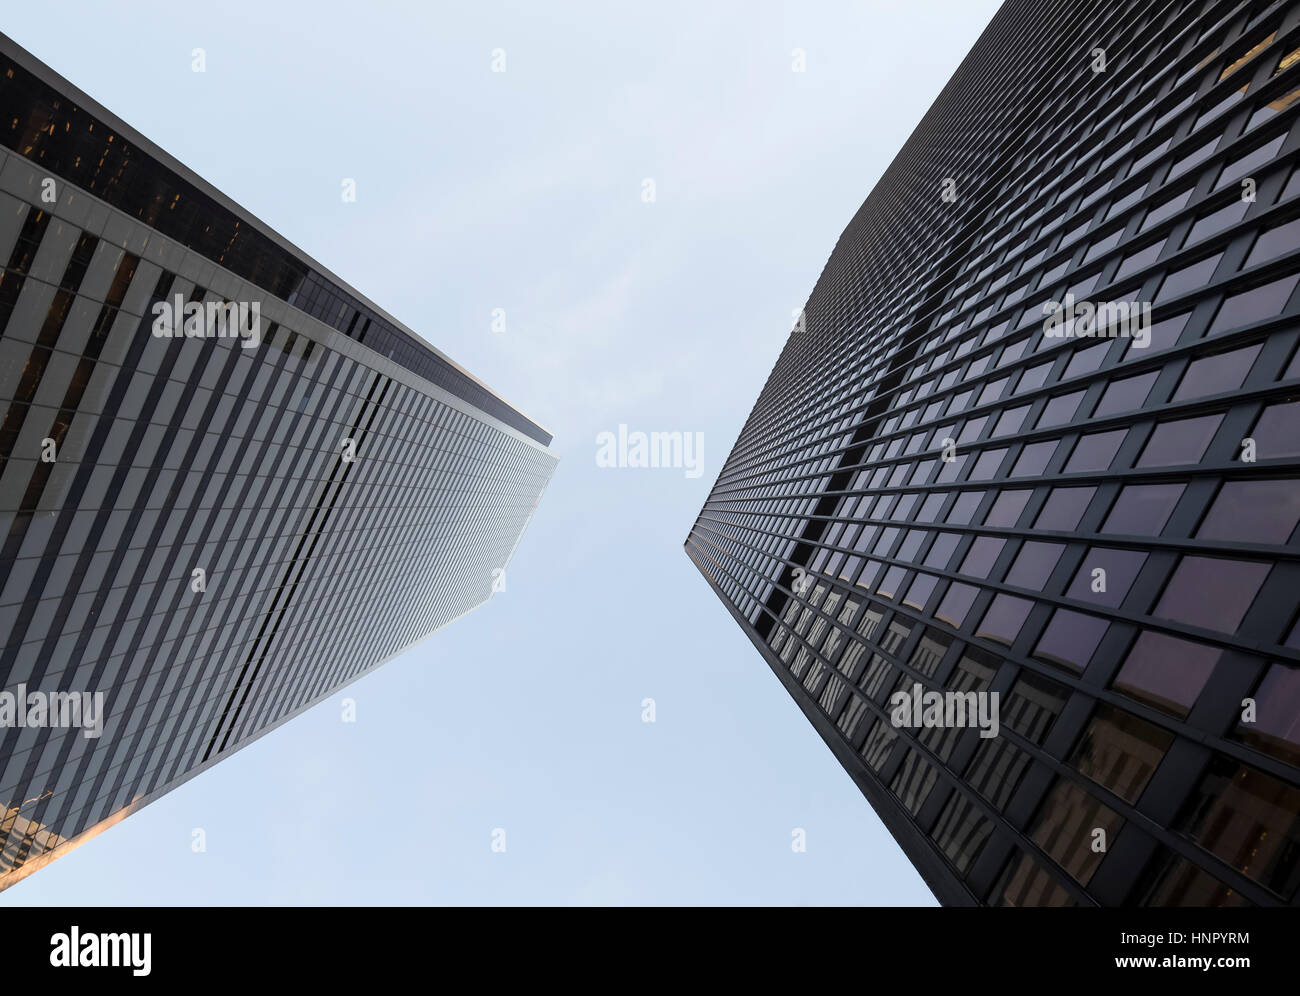 Two office towers in the financial district of Toronto Canada appear to be leaning towards one another. Stock Photo